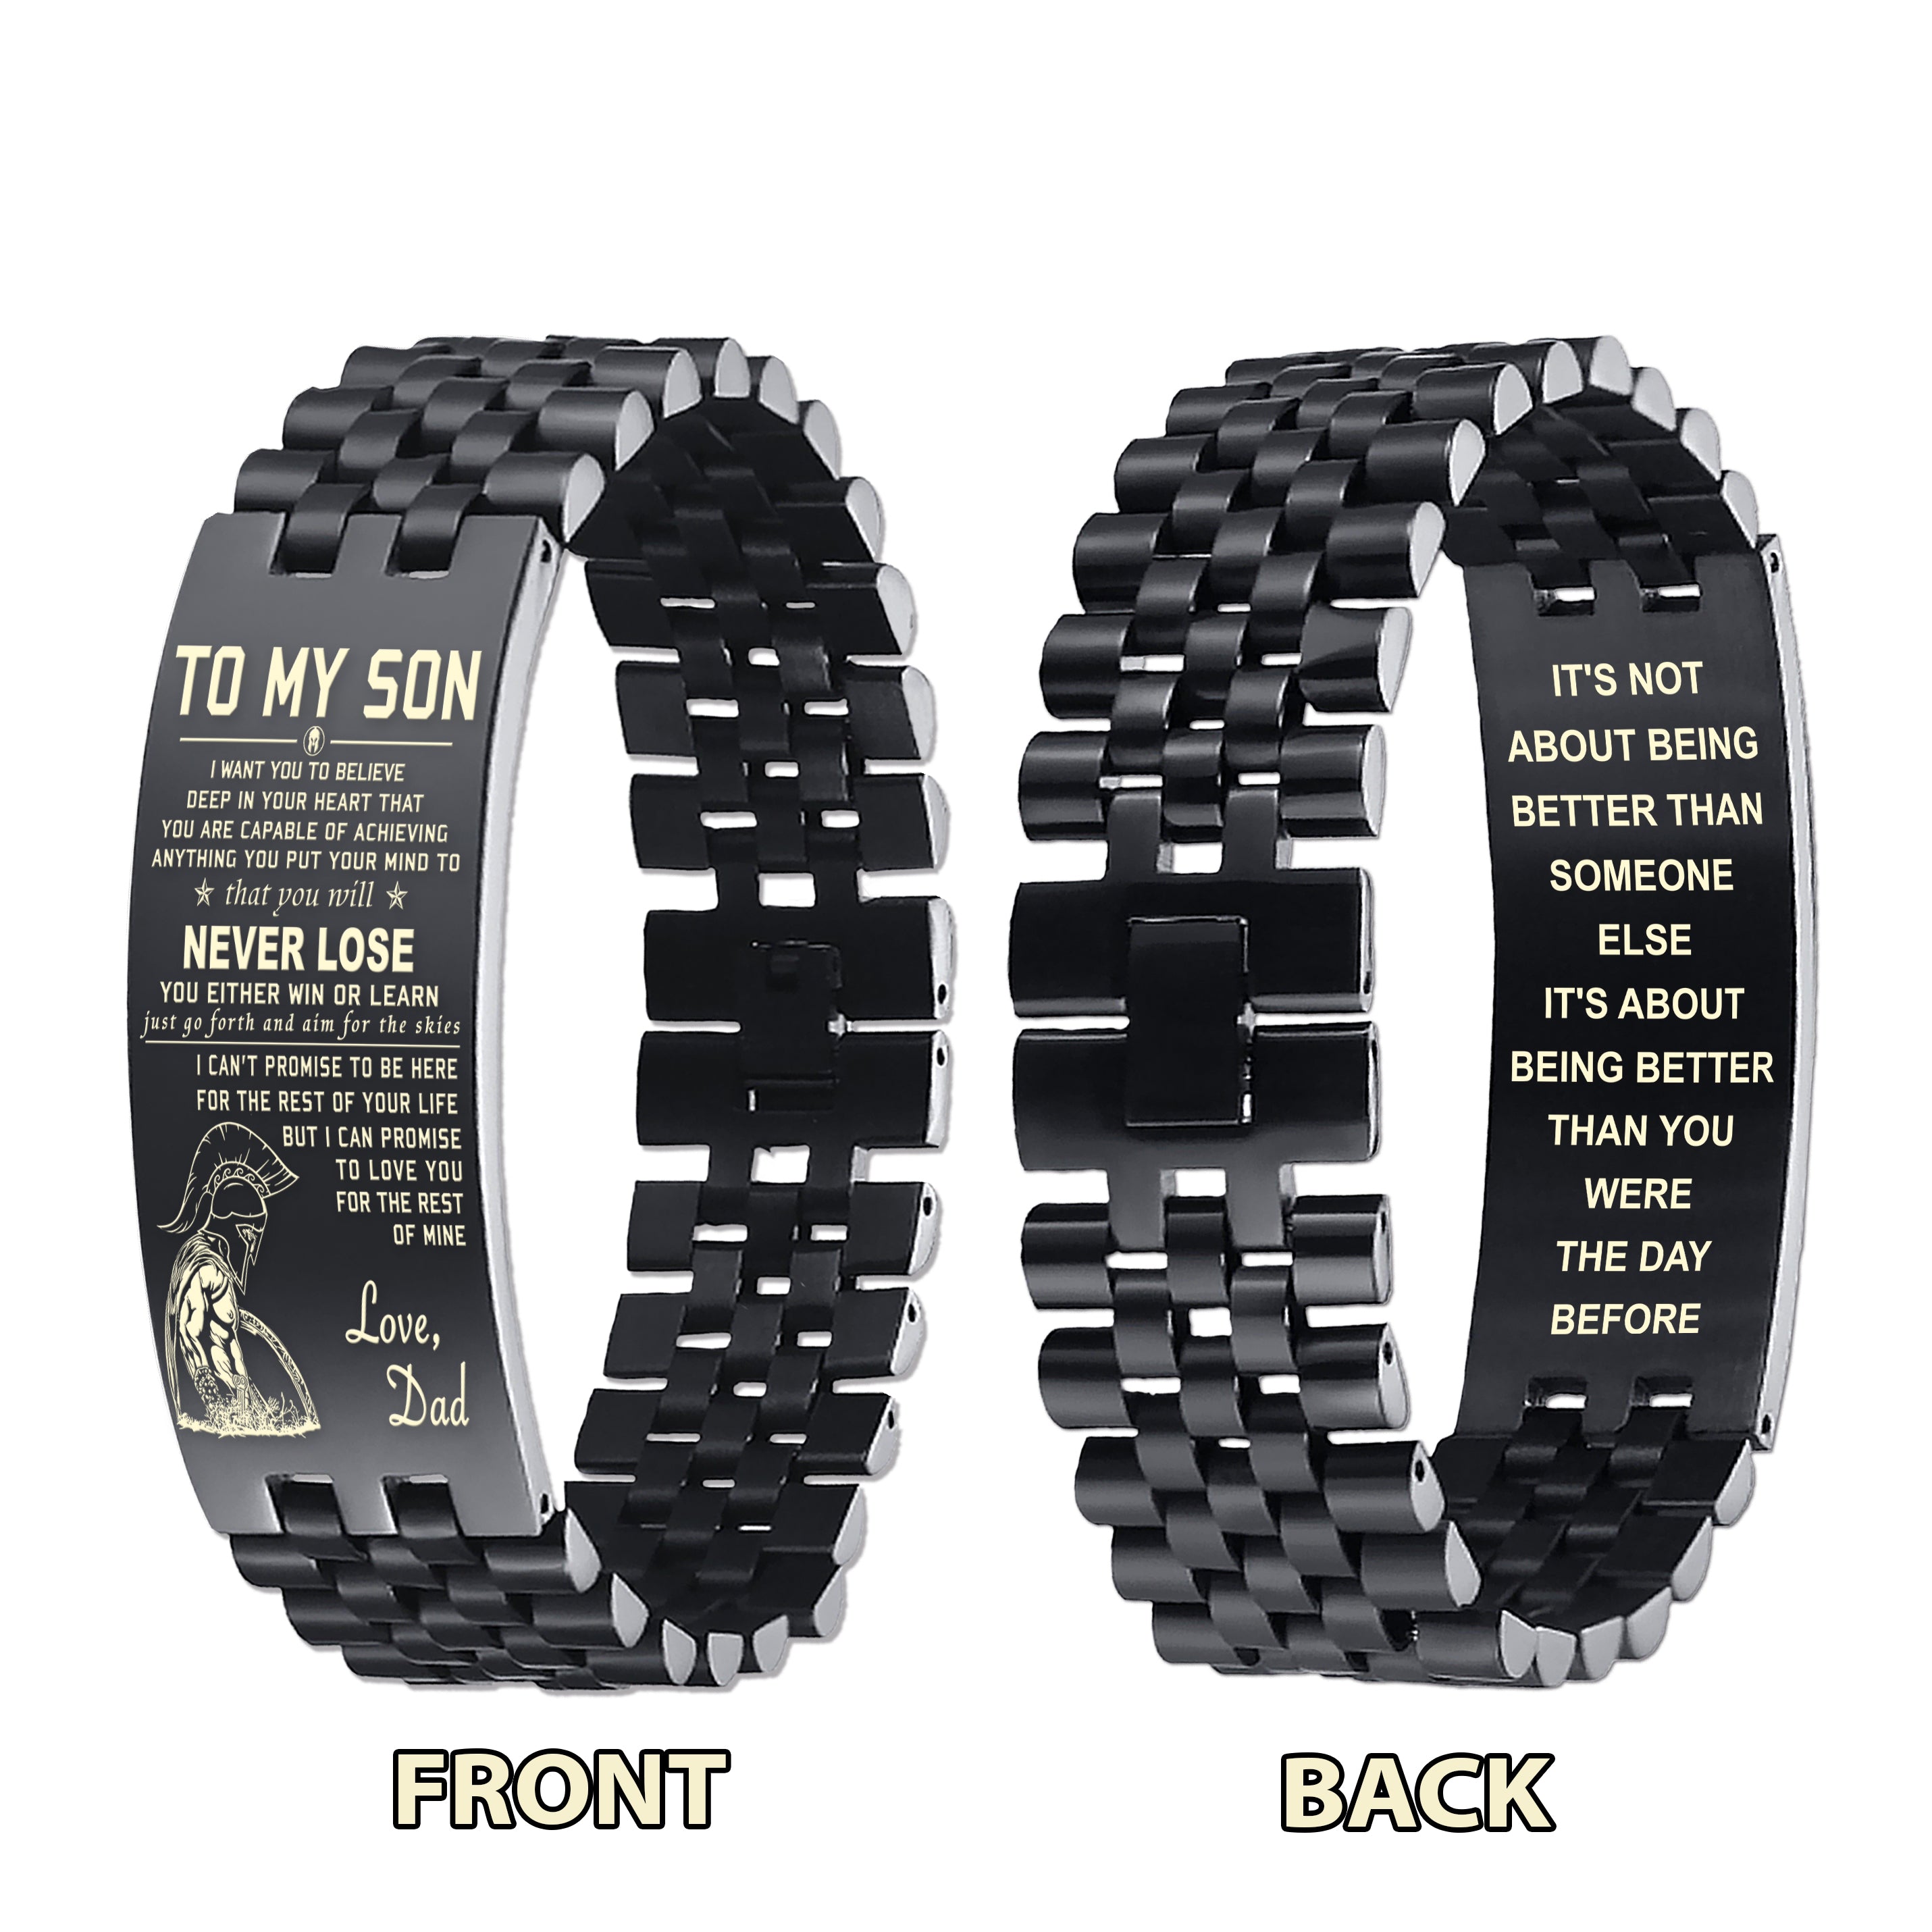 Spartan double side bracelet that you win never lose It is about better than you were the day before